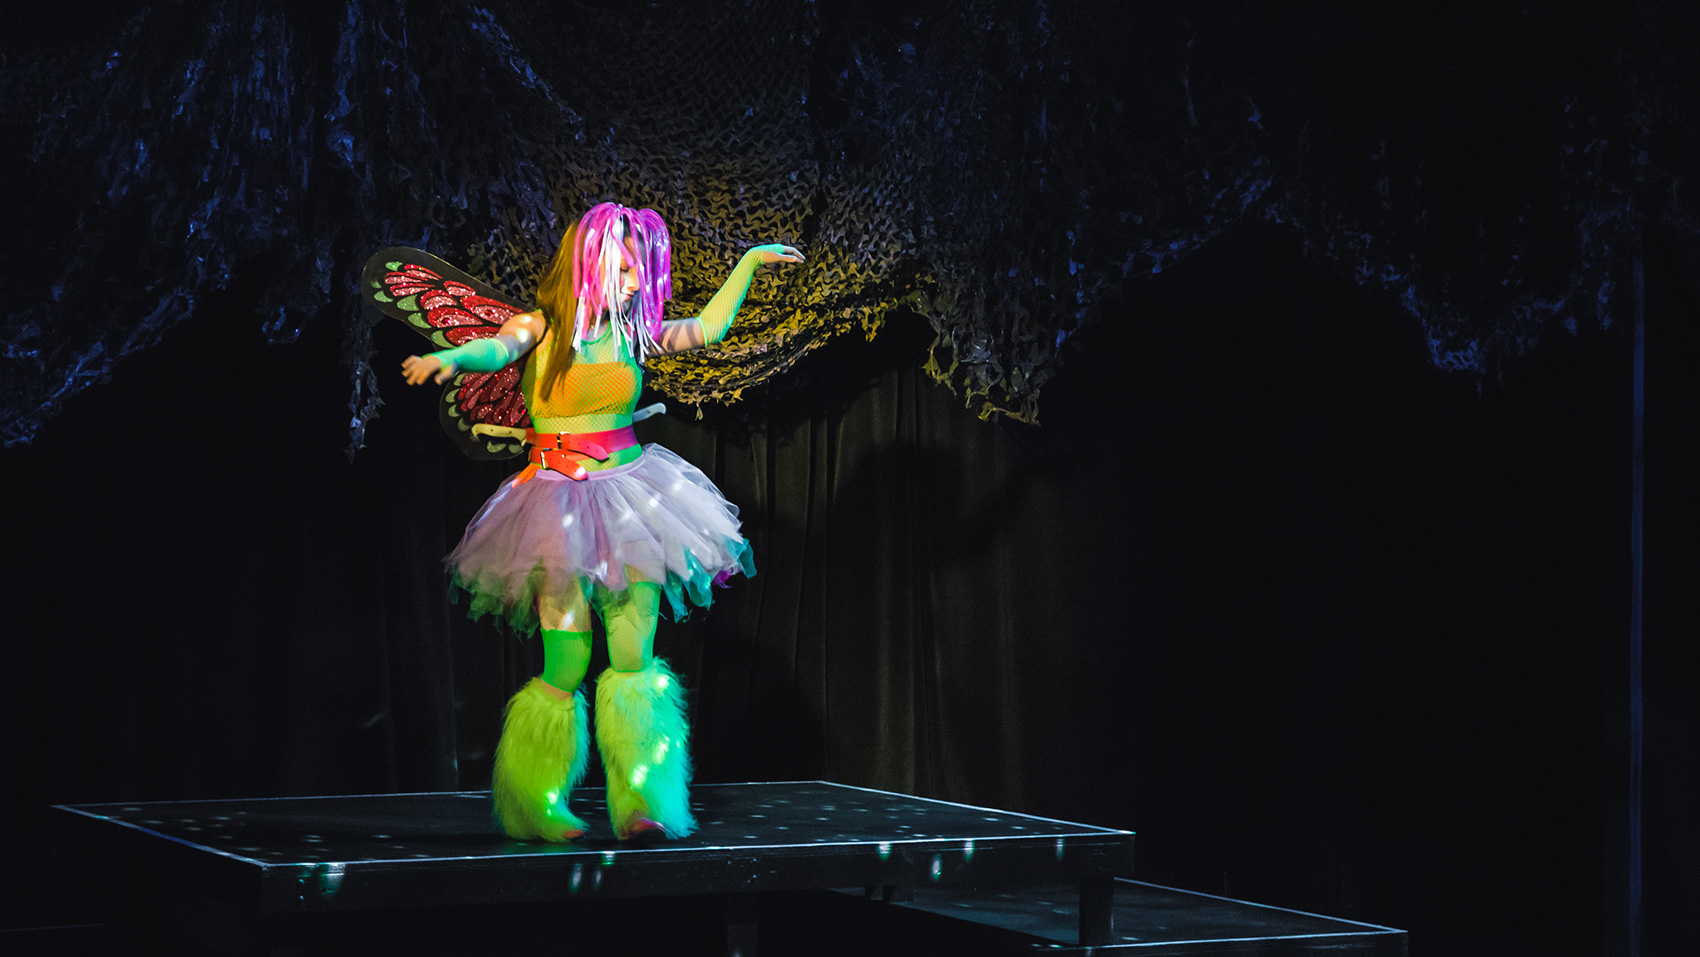 A woman decked in a tutu,fuzzy neon green boots, and butterfly wings stands on a platform, a look of grace on her face as she holds her arms out.